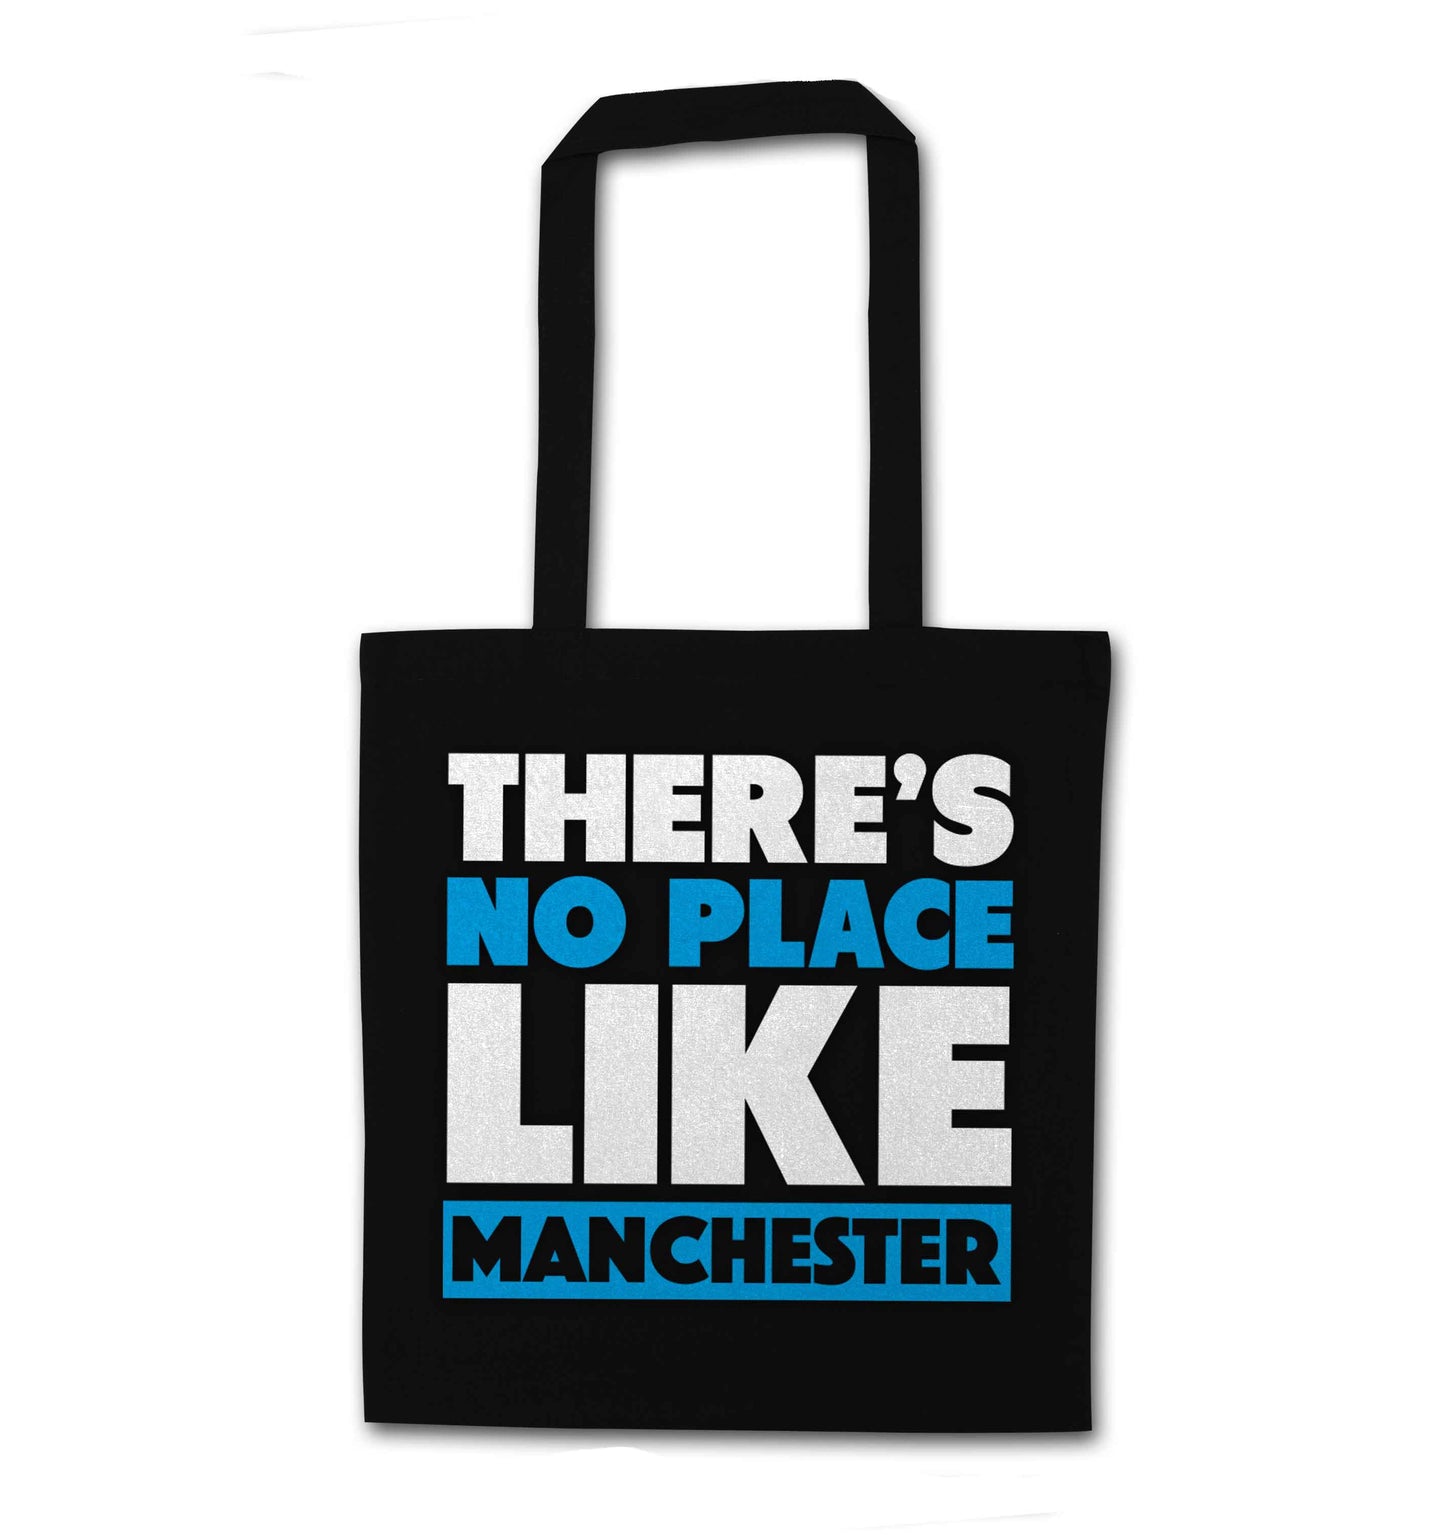 There's no place like Manchester black tote bag